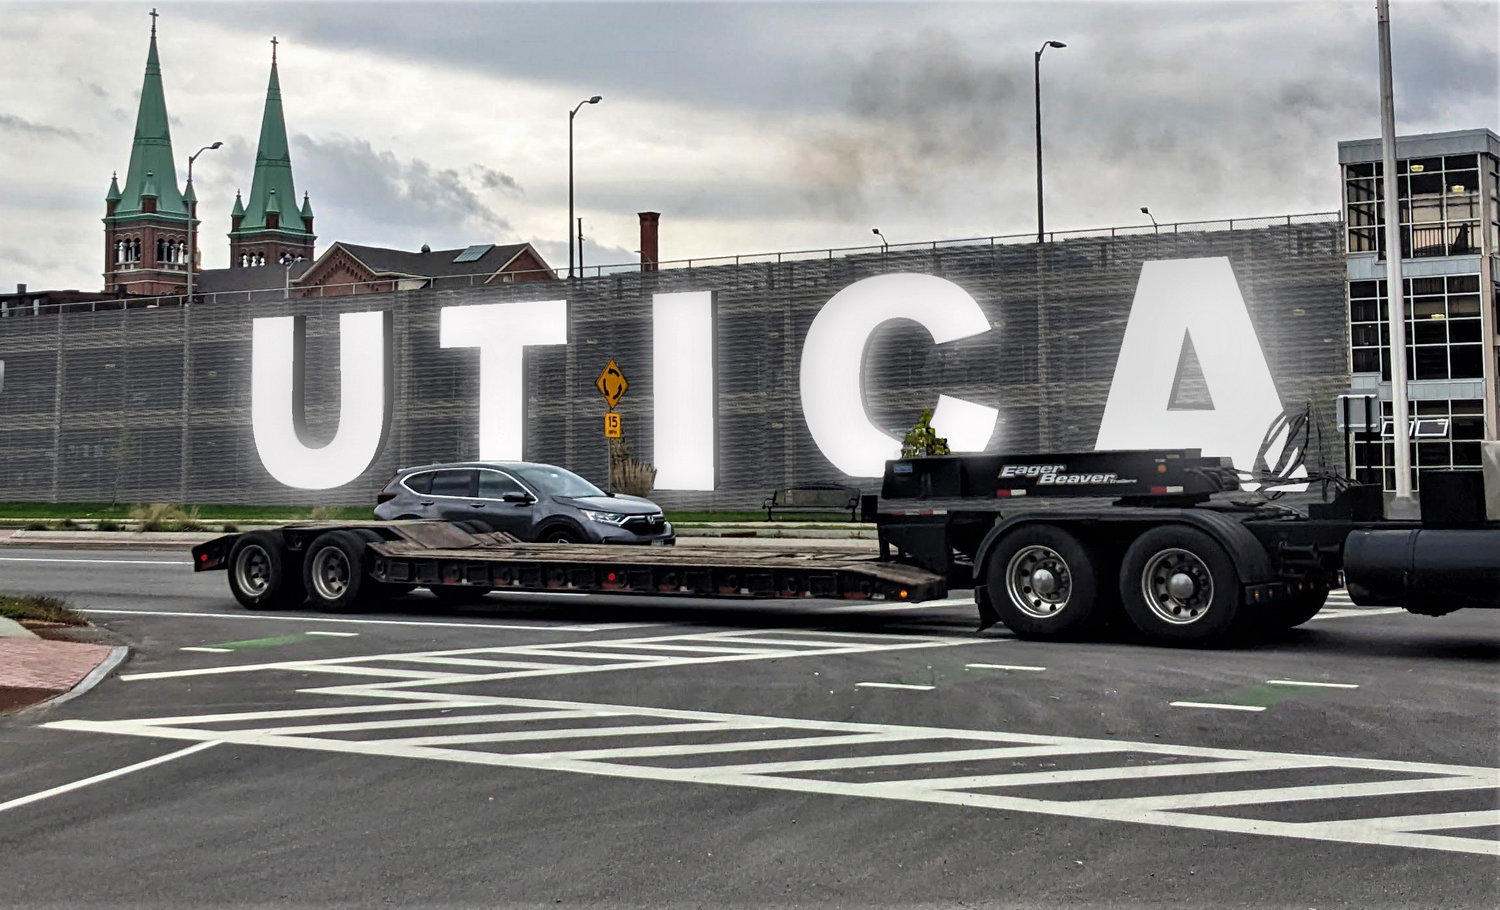 An artist’s rendering shows what a new electronic UTICA sign will look like when it is constructed on the north side of the Utica Place Garage, will be visible to visitors coming off of the State Thruway, and will serve as a source of civic pride for residents, officials said. It will feature 18-foot, LED letters.